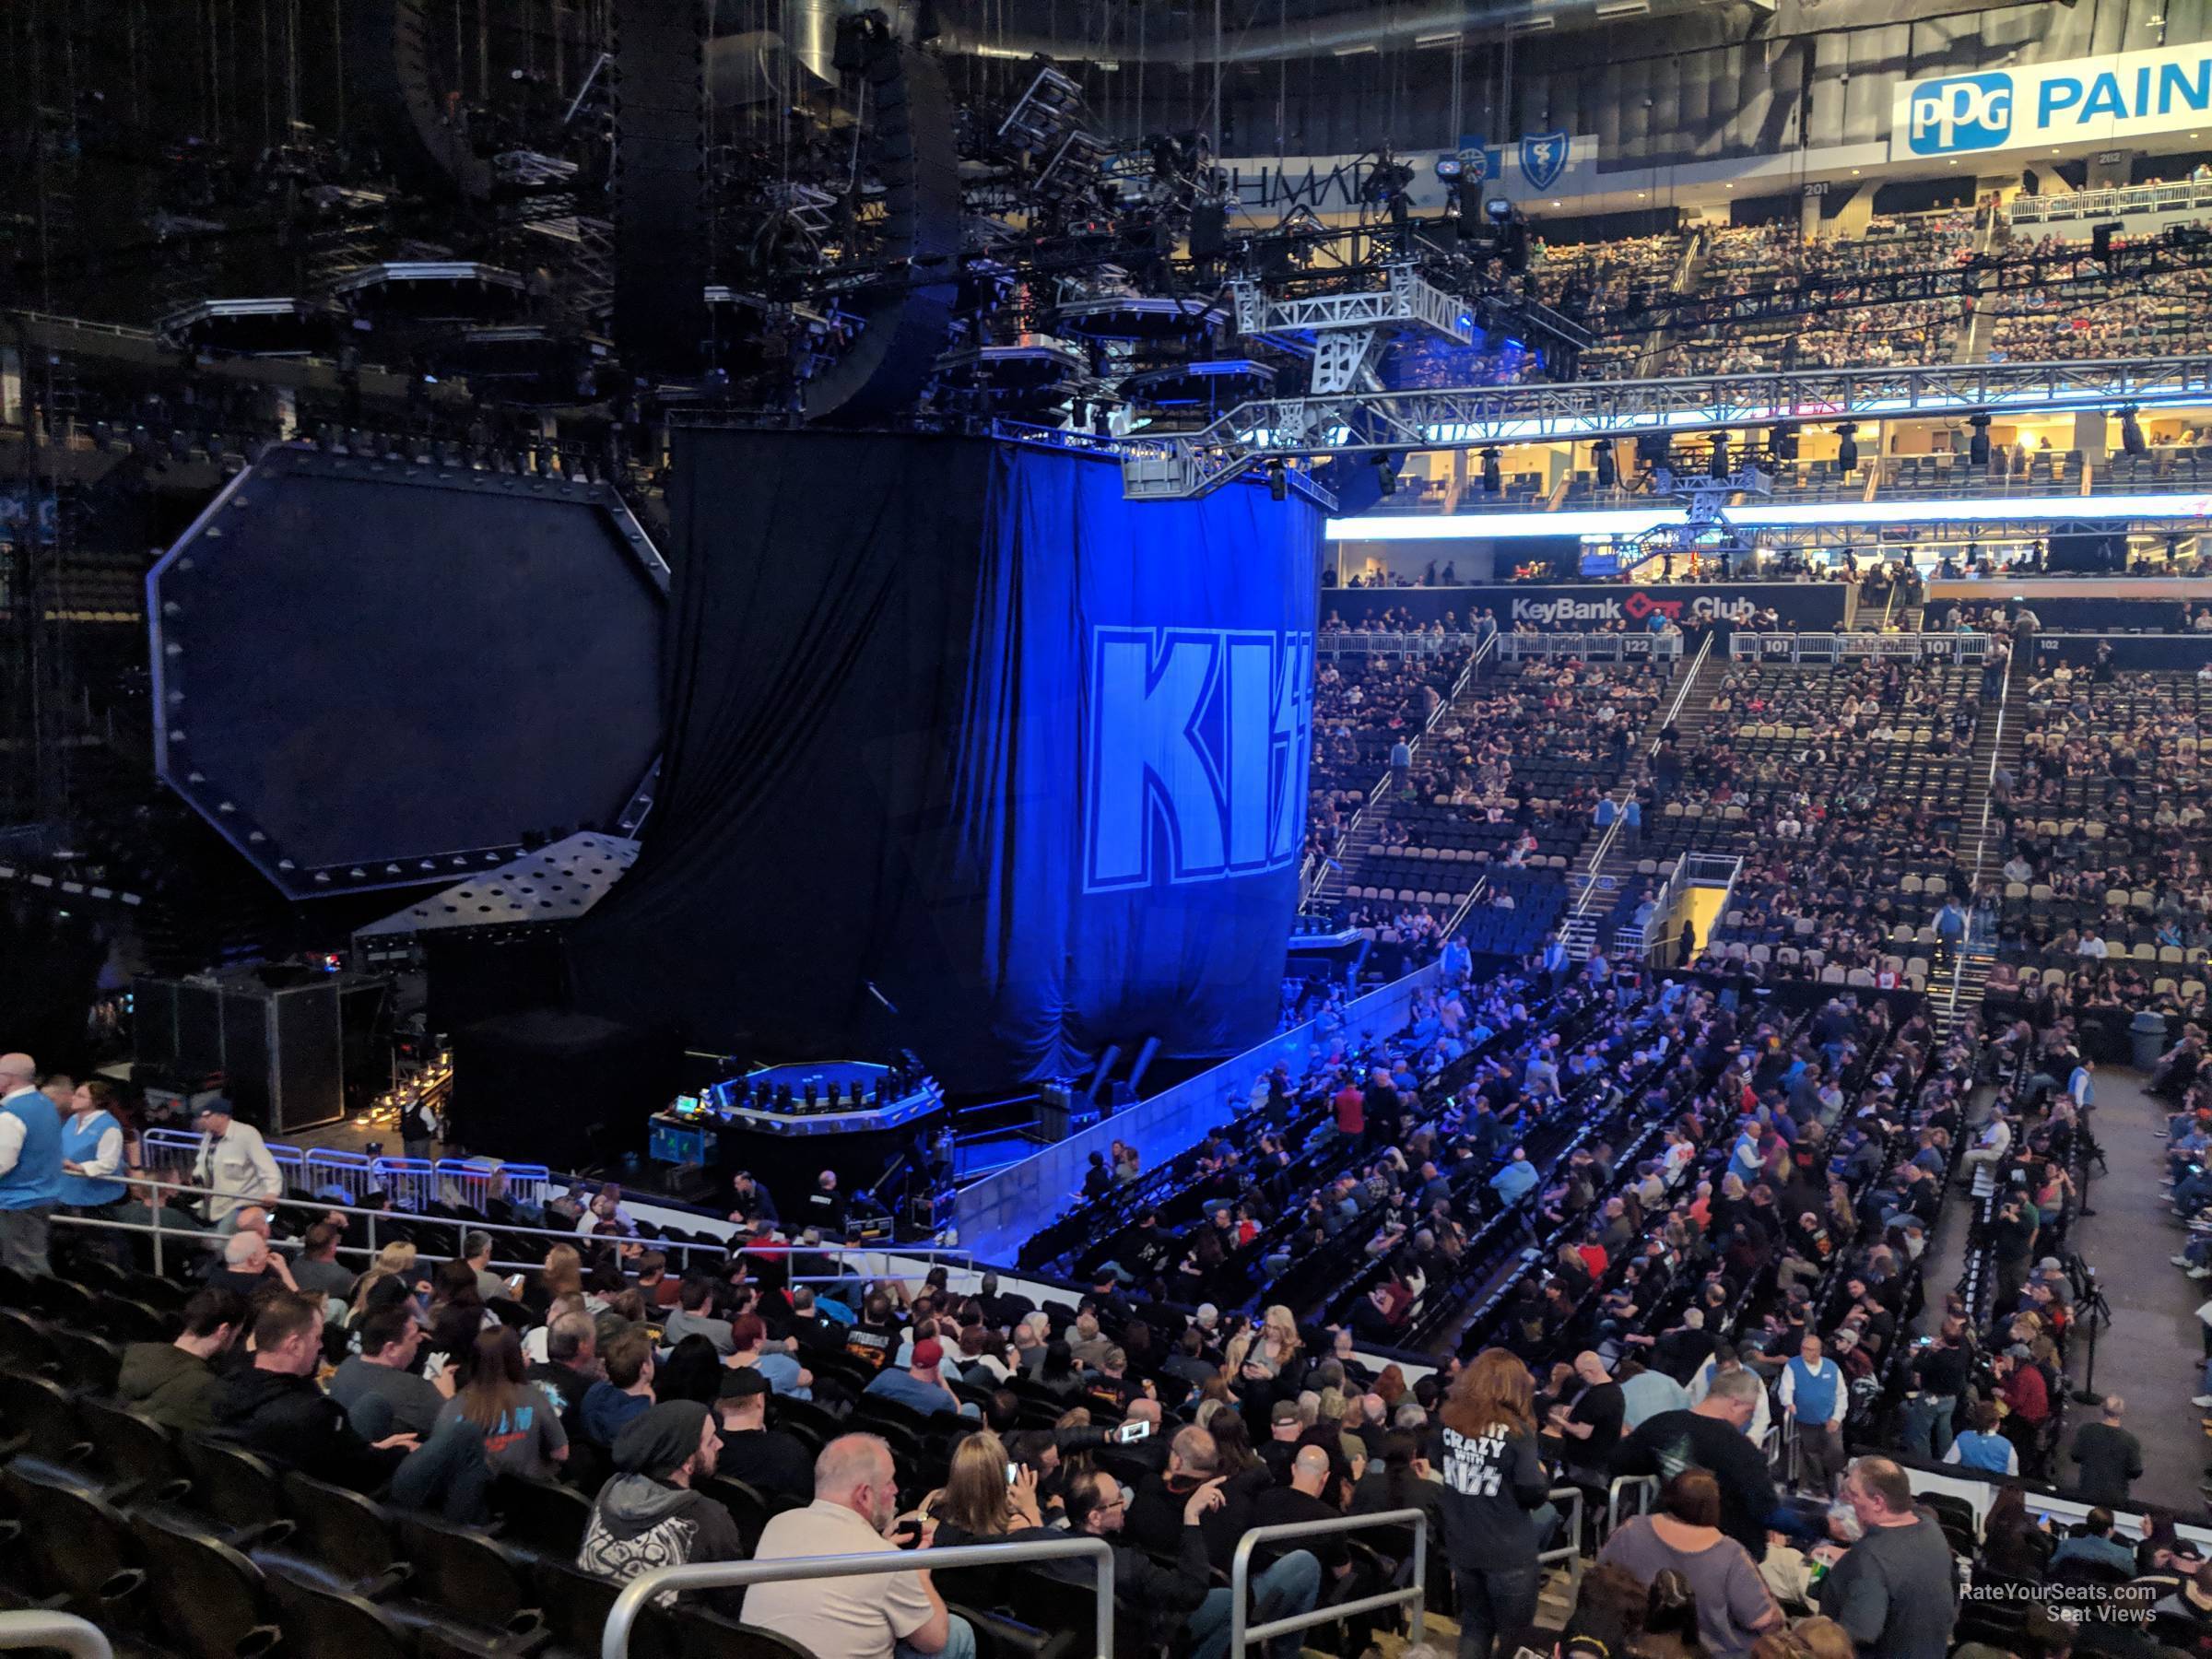 section 112, row n seat view  for concert - ppg paints arena